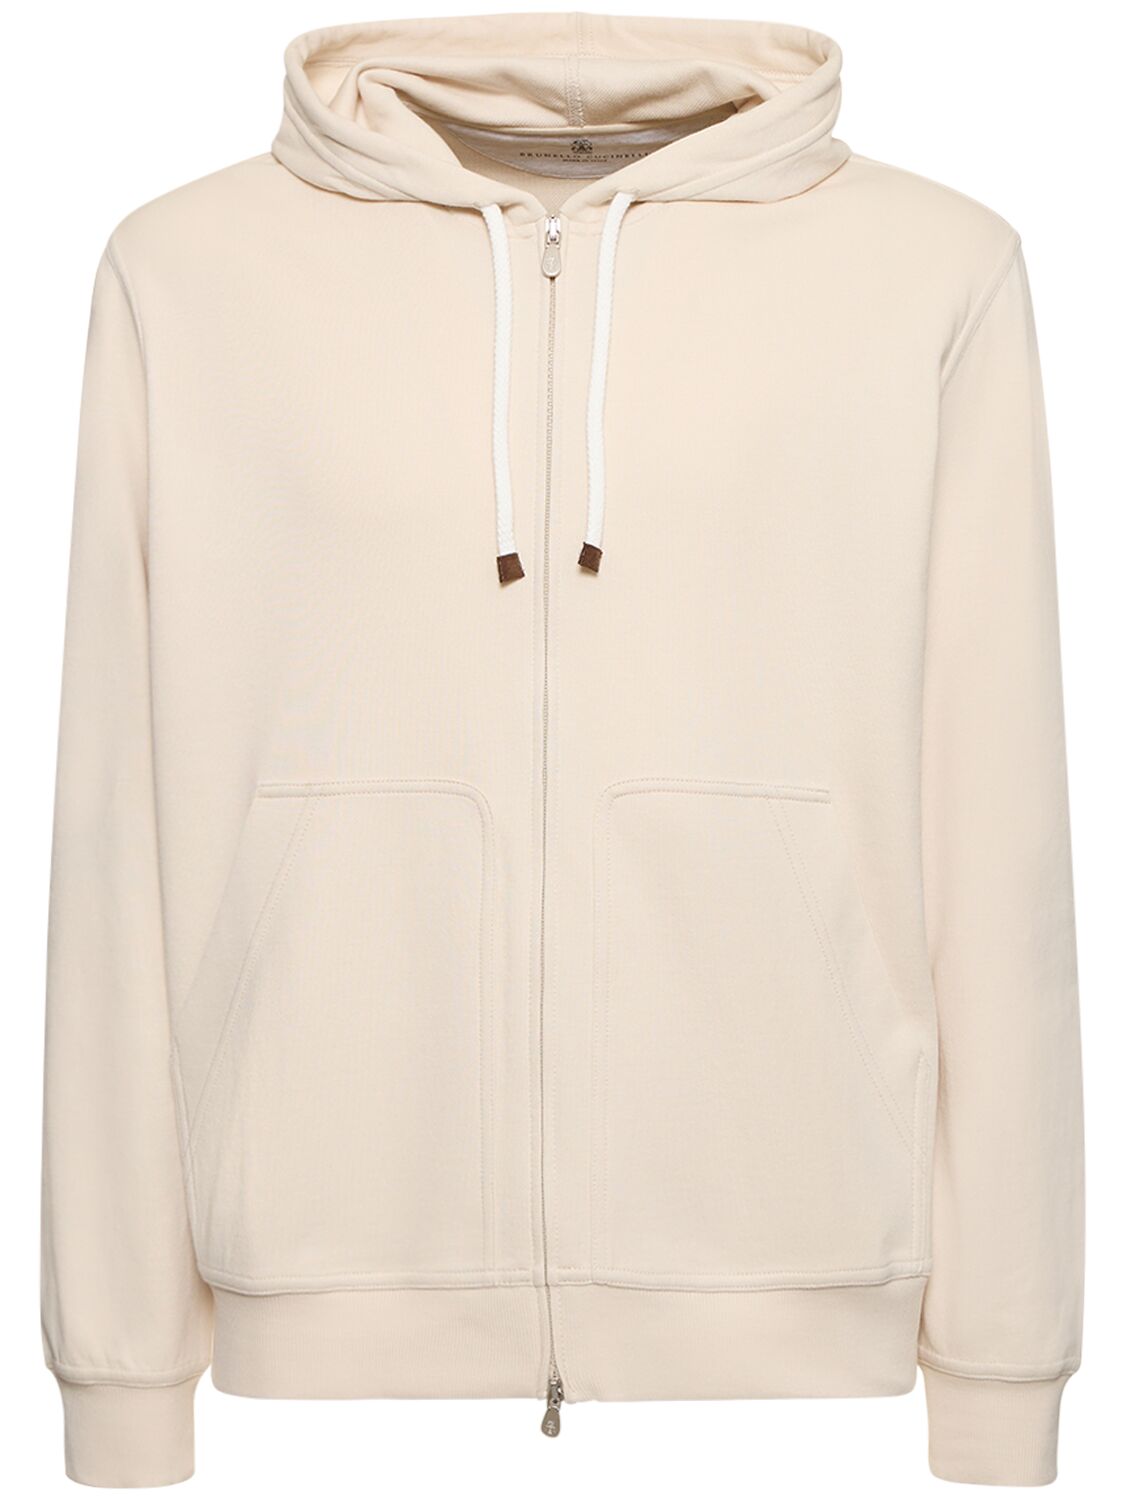 Image of Cotton Blend Zipped Hoodie